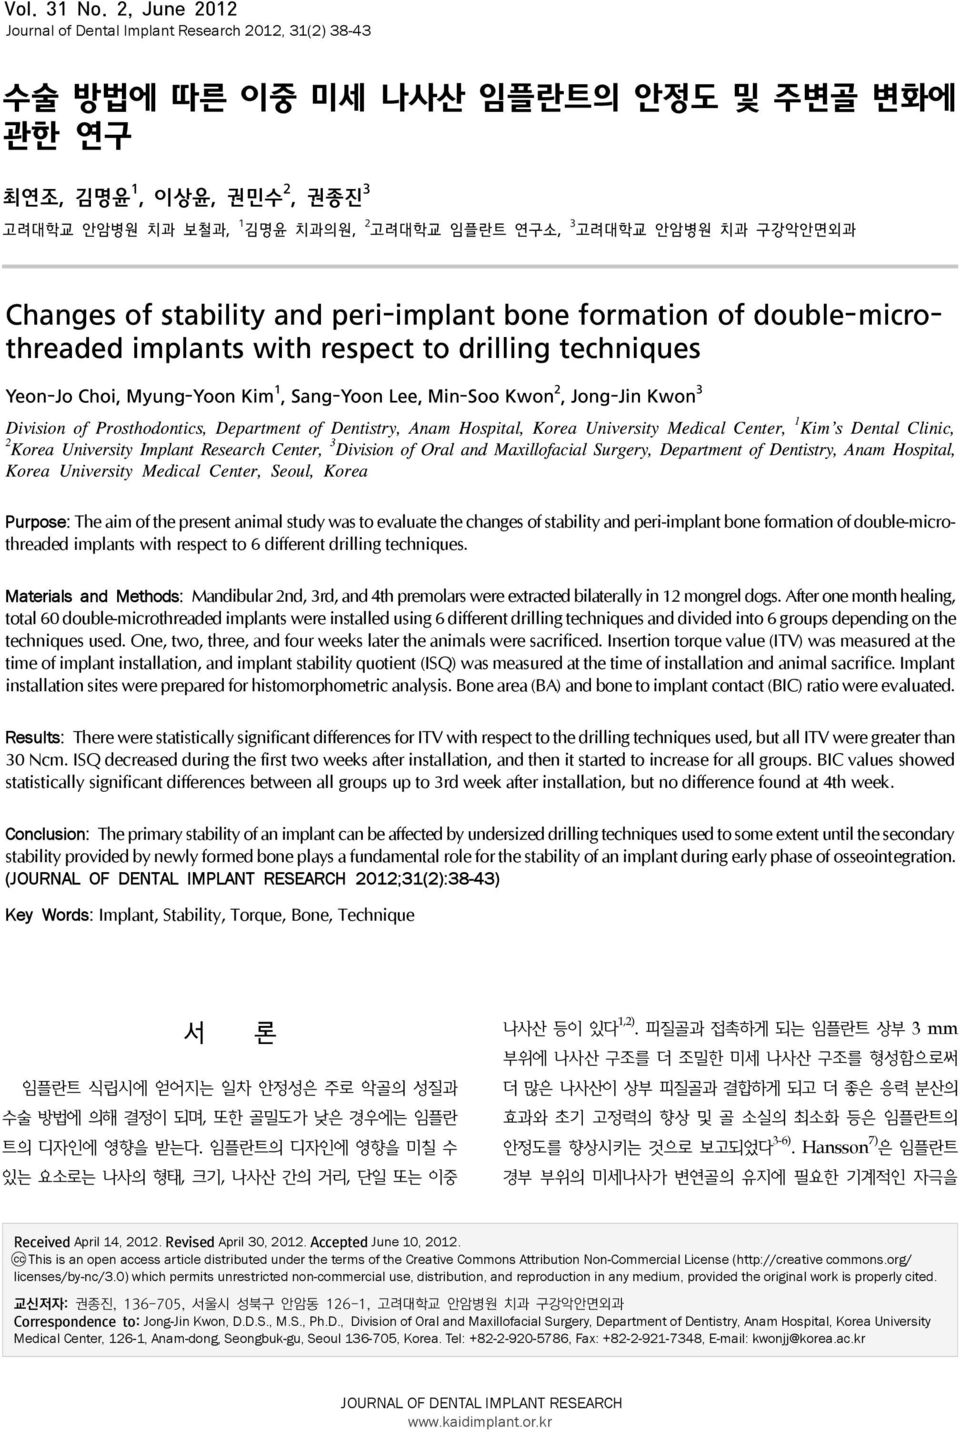 of double-microthreaded implants with respect to drilling techniques Yeon-Jo Choi, Myung-Yoon Kim, Sang-Yoon Lee, Min-Soo Kwon, Jong-Jin Kwon Division of Prosthodontics, Department of Dentistry, Anam